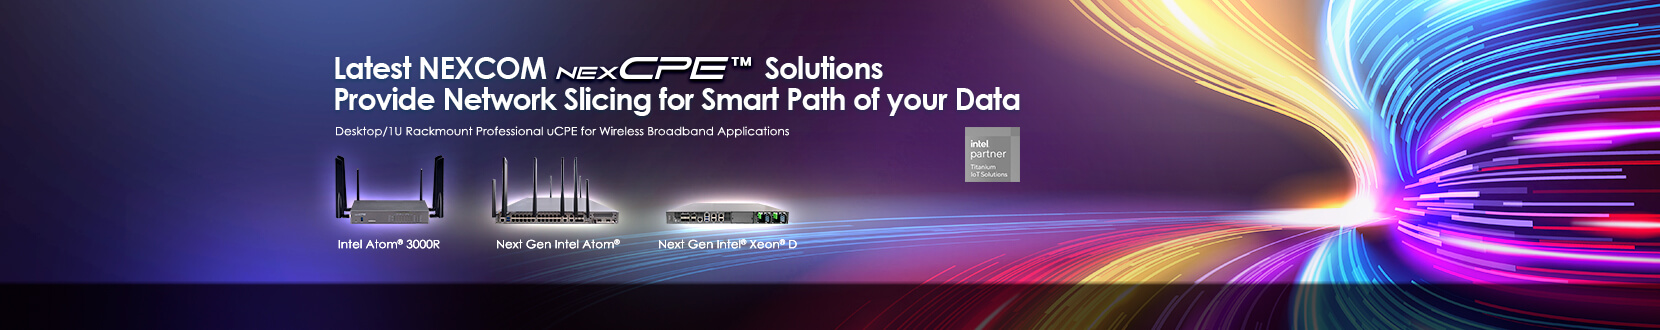 nexCPE™ Solutions Provide Network Slicing for Smart Path of Data